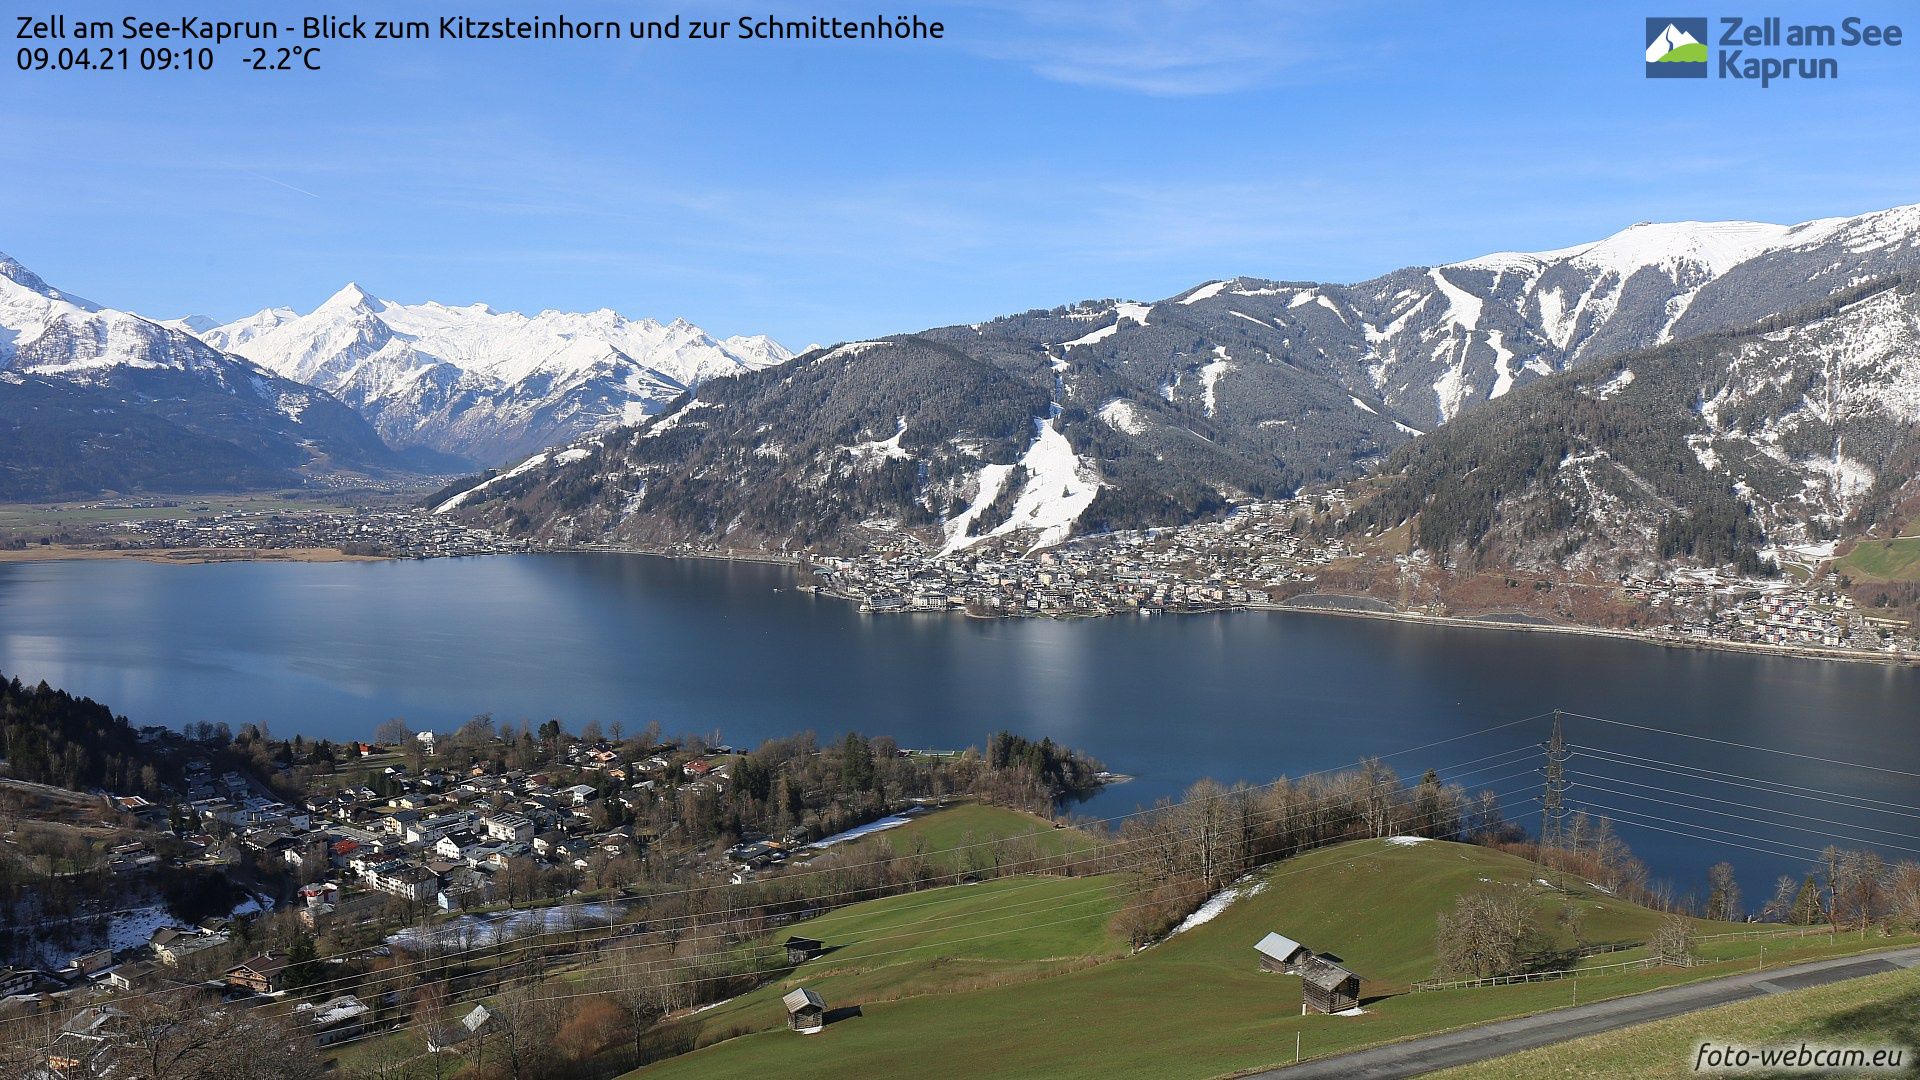 The valleys are already largely snow-free again, like here in Zell am See (photo-webcam.eu)